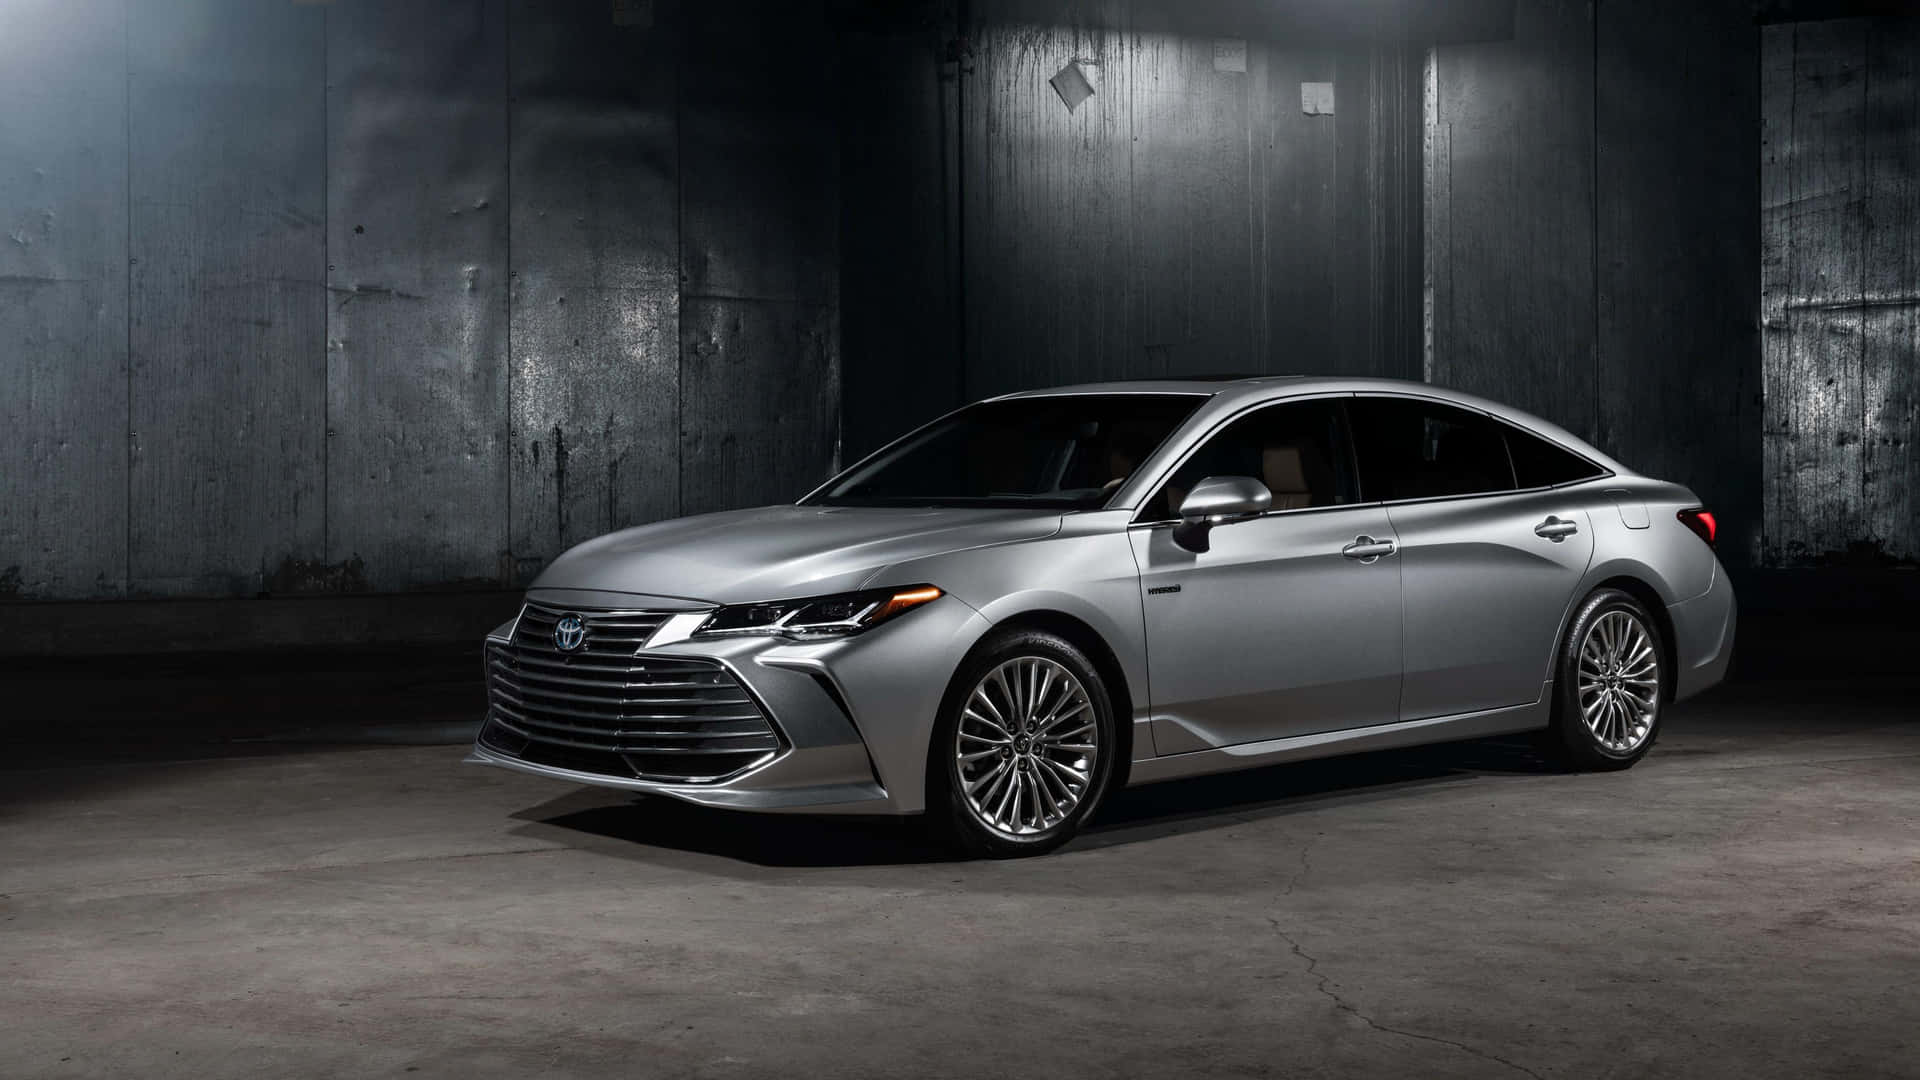 Sleek And Modern Toyota Avalon In Action Wallpaper